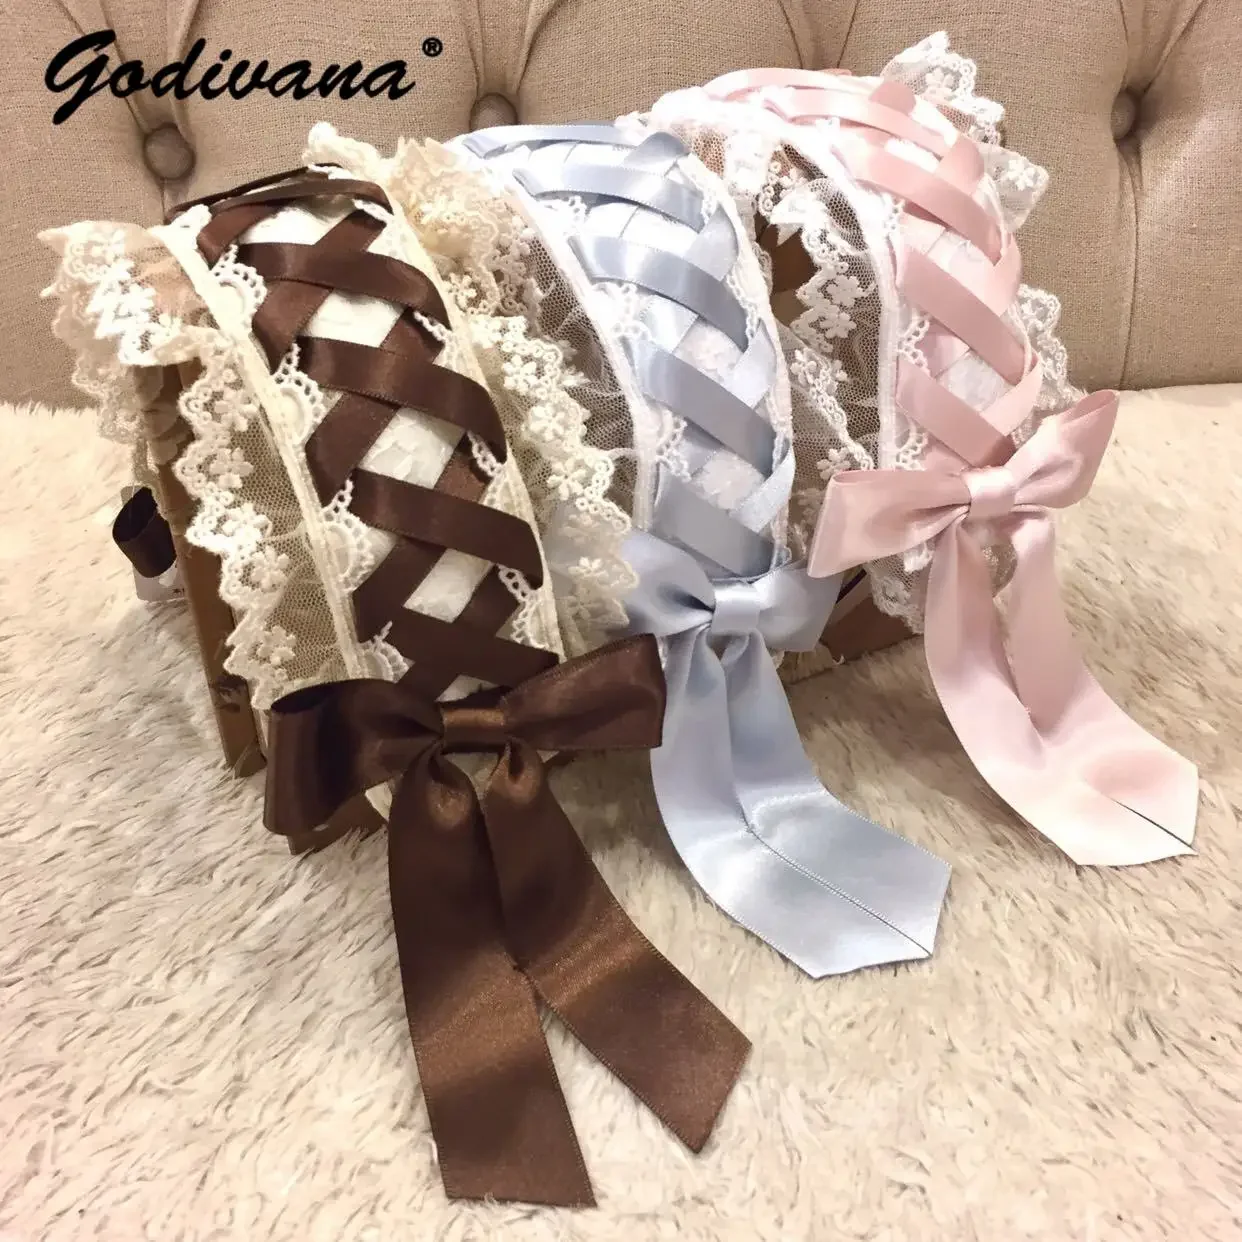 Japanese Style Lace Lace Maid Cute Style Series Headband Sweet Kawaii Girls Clothing Accessories Lace Bow Hair Headwear